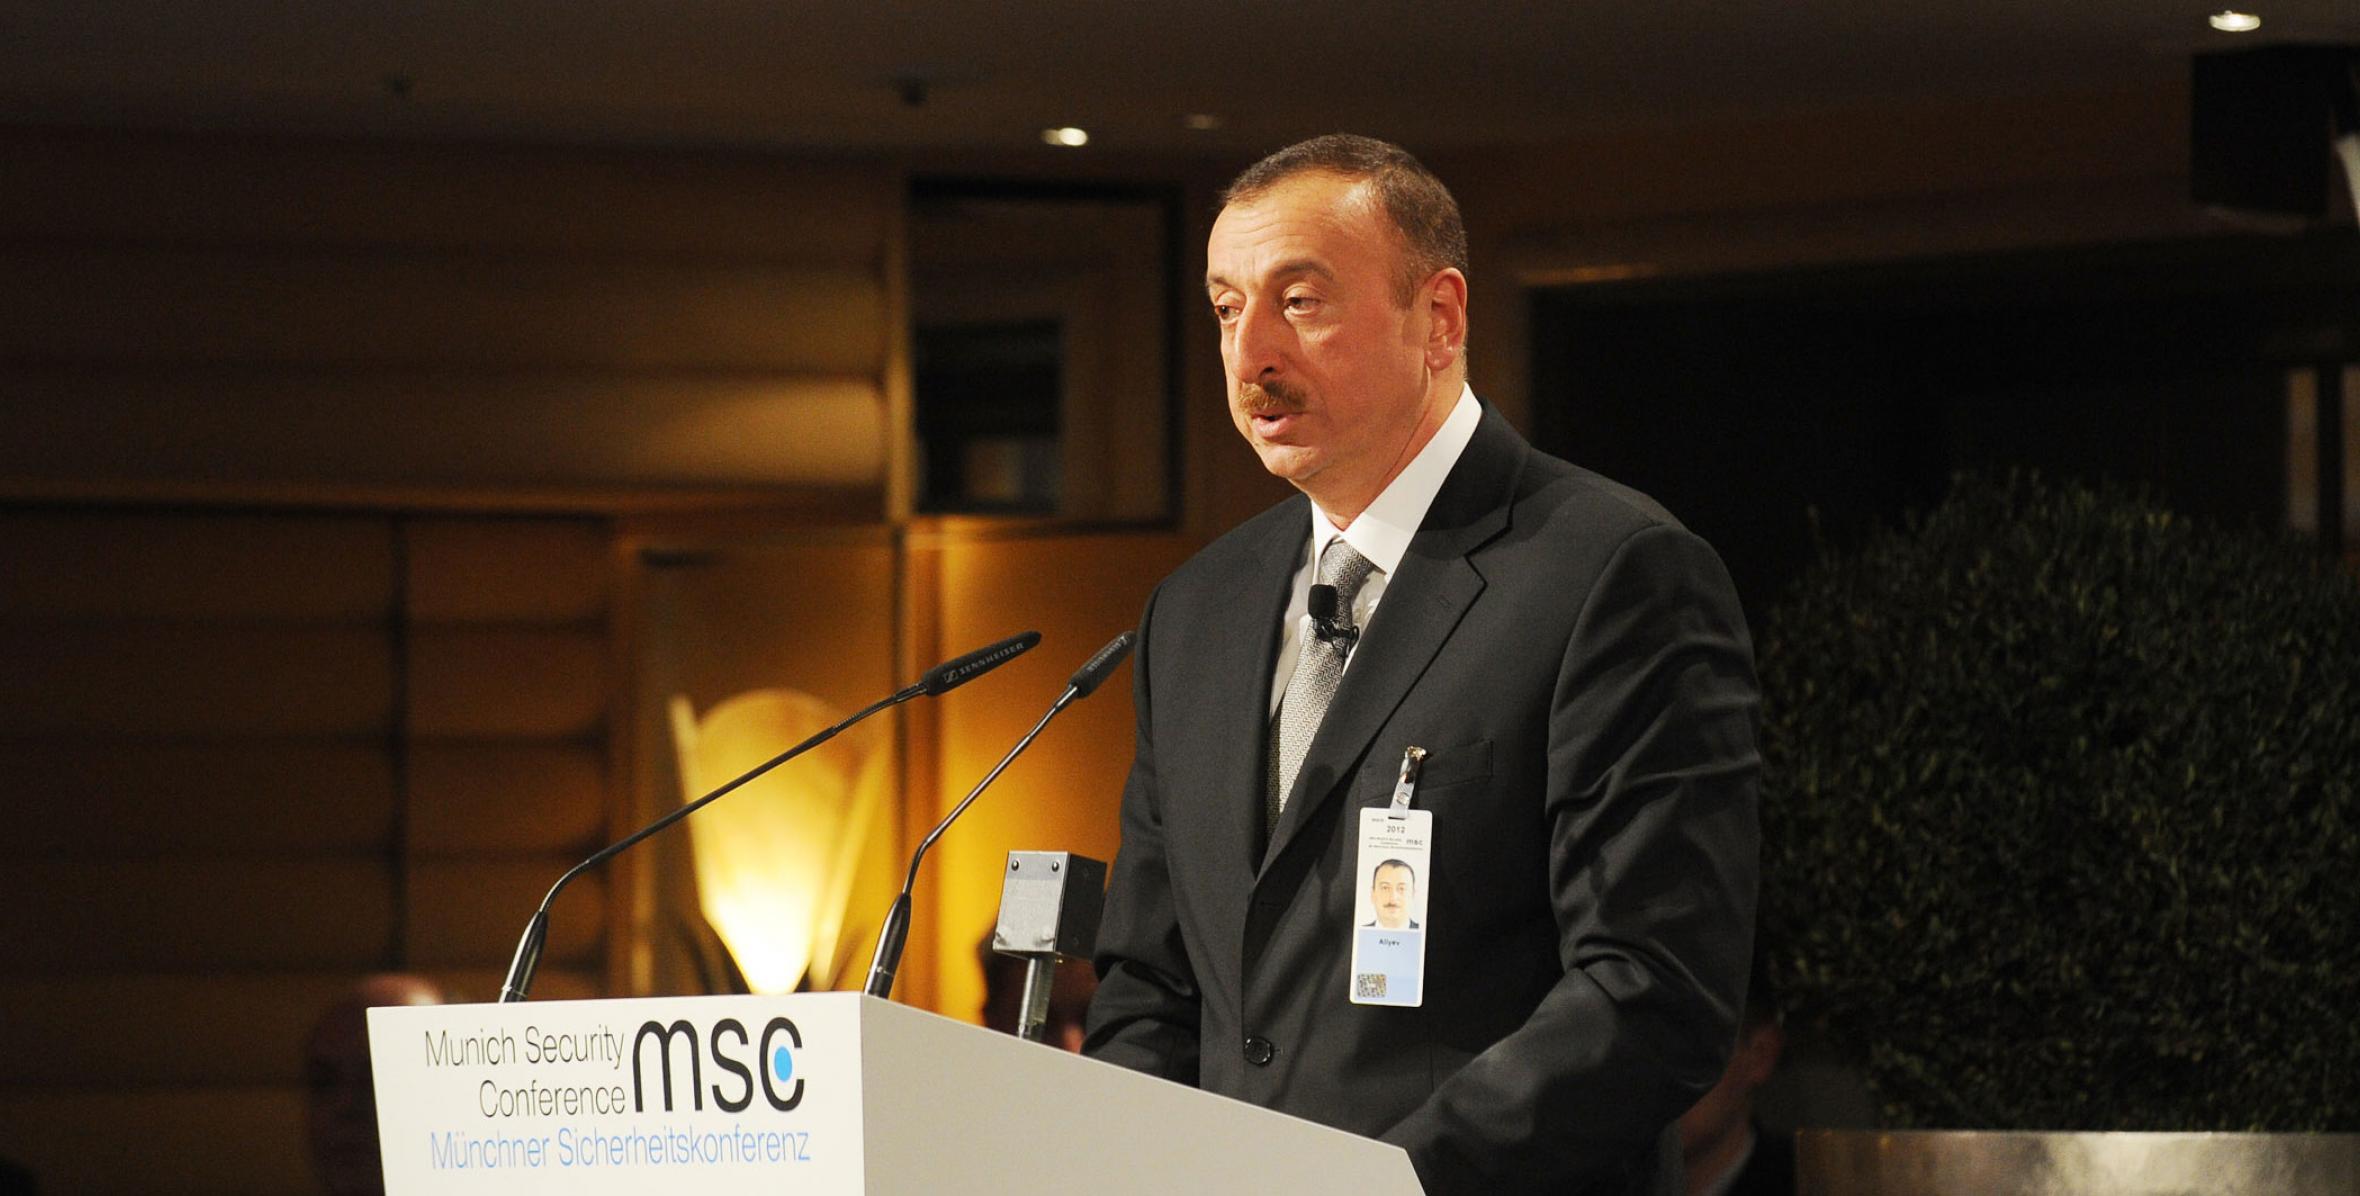 Ilham Aliyev attended the Munich Security Conference